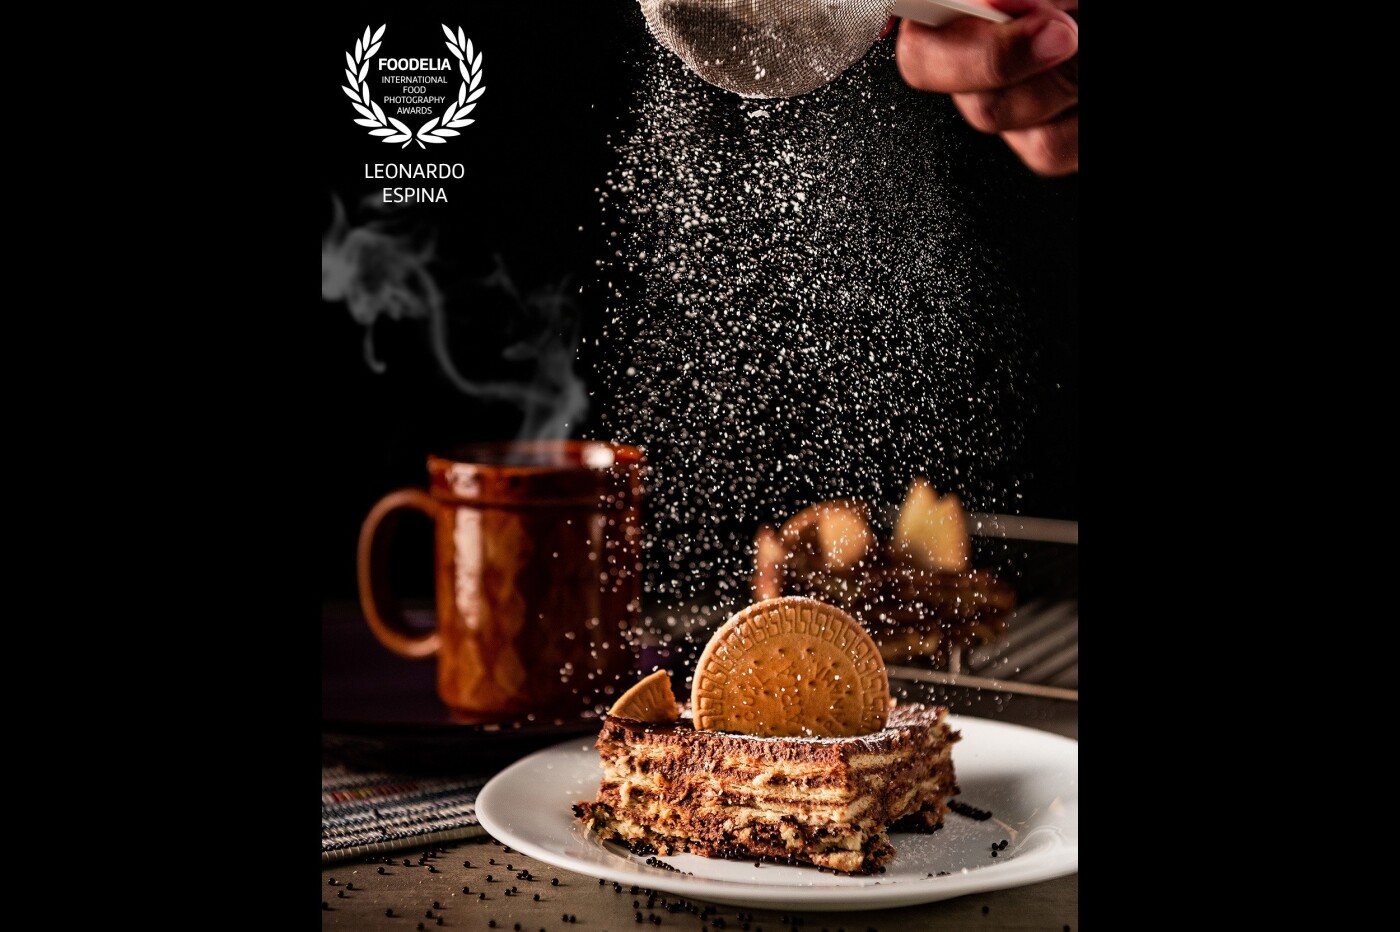 A rain of flavor, is actually what we have got in this gastronomic photo session. A layered cookie-chocolate cake that made us fall in love.